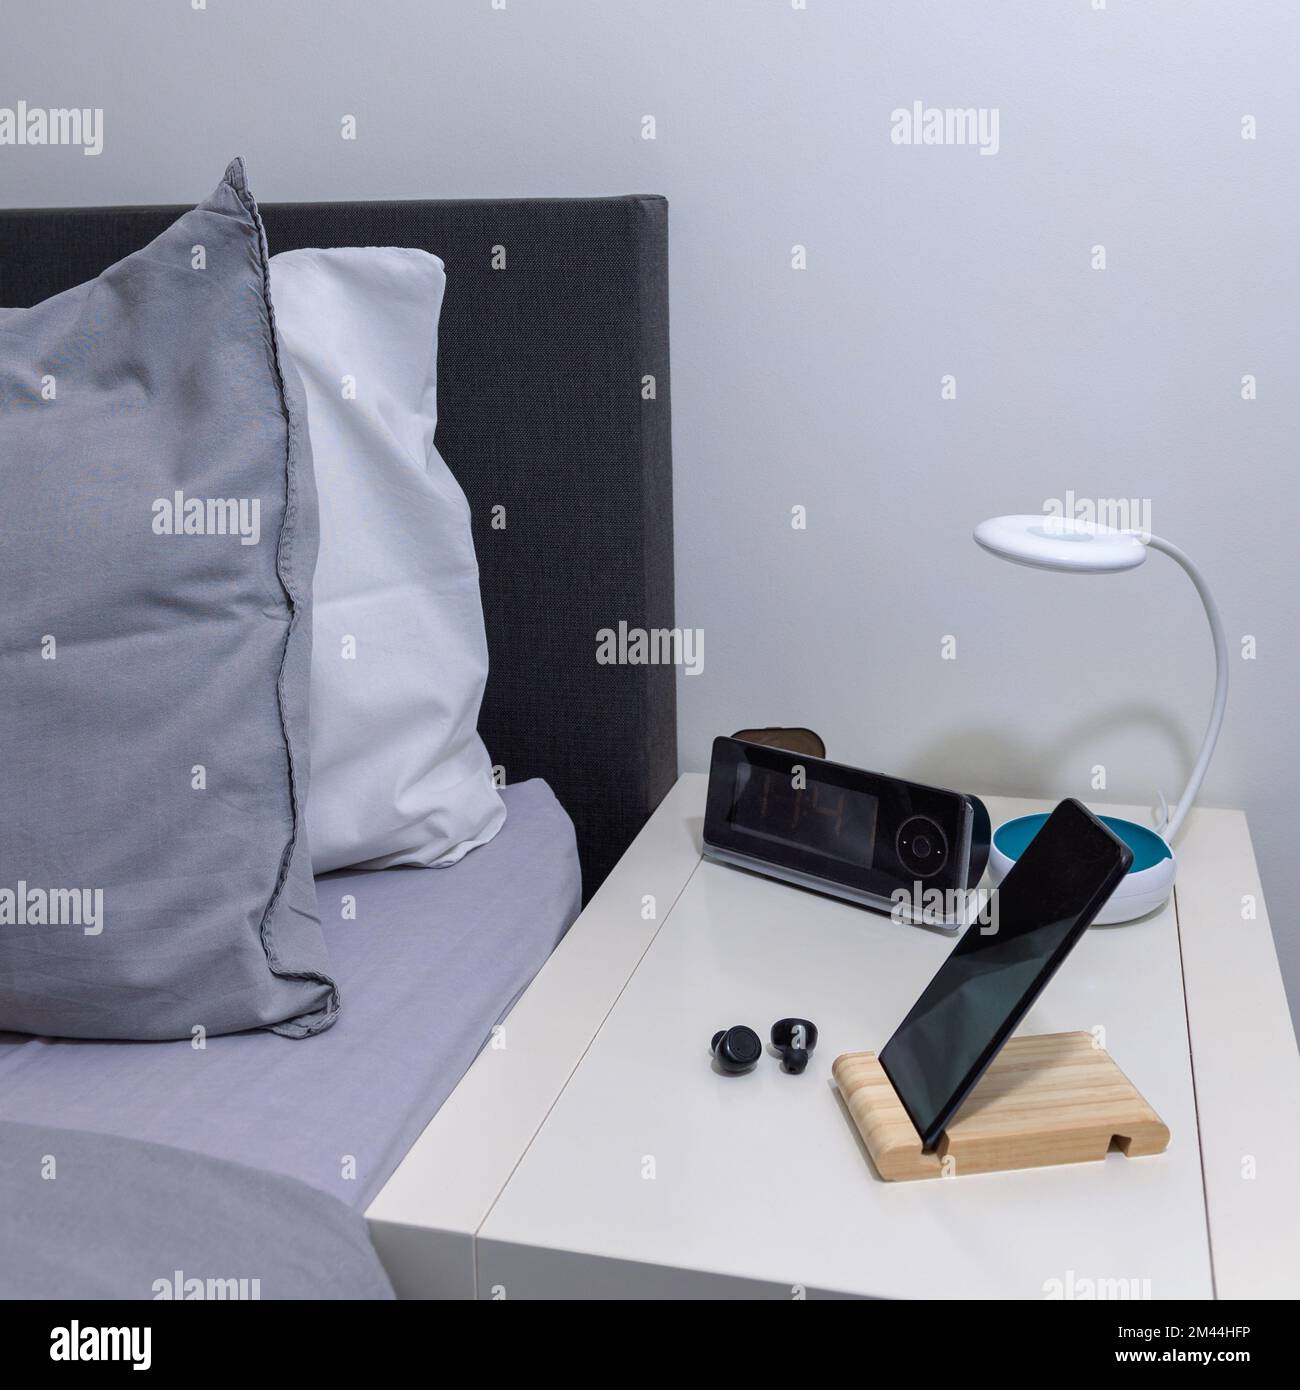 Smartphone on the bedside table with lamp, headset, clock and bed as background. Square format Stock Photo